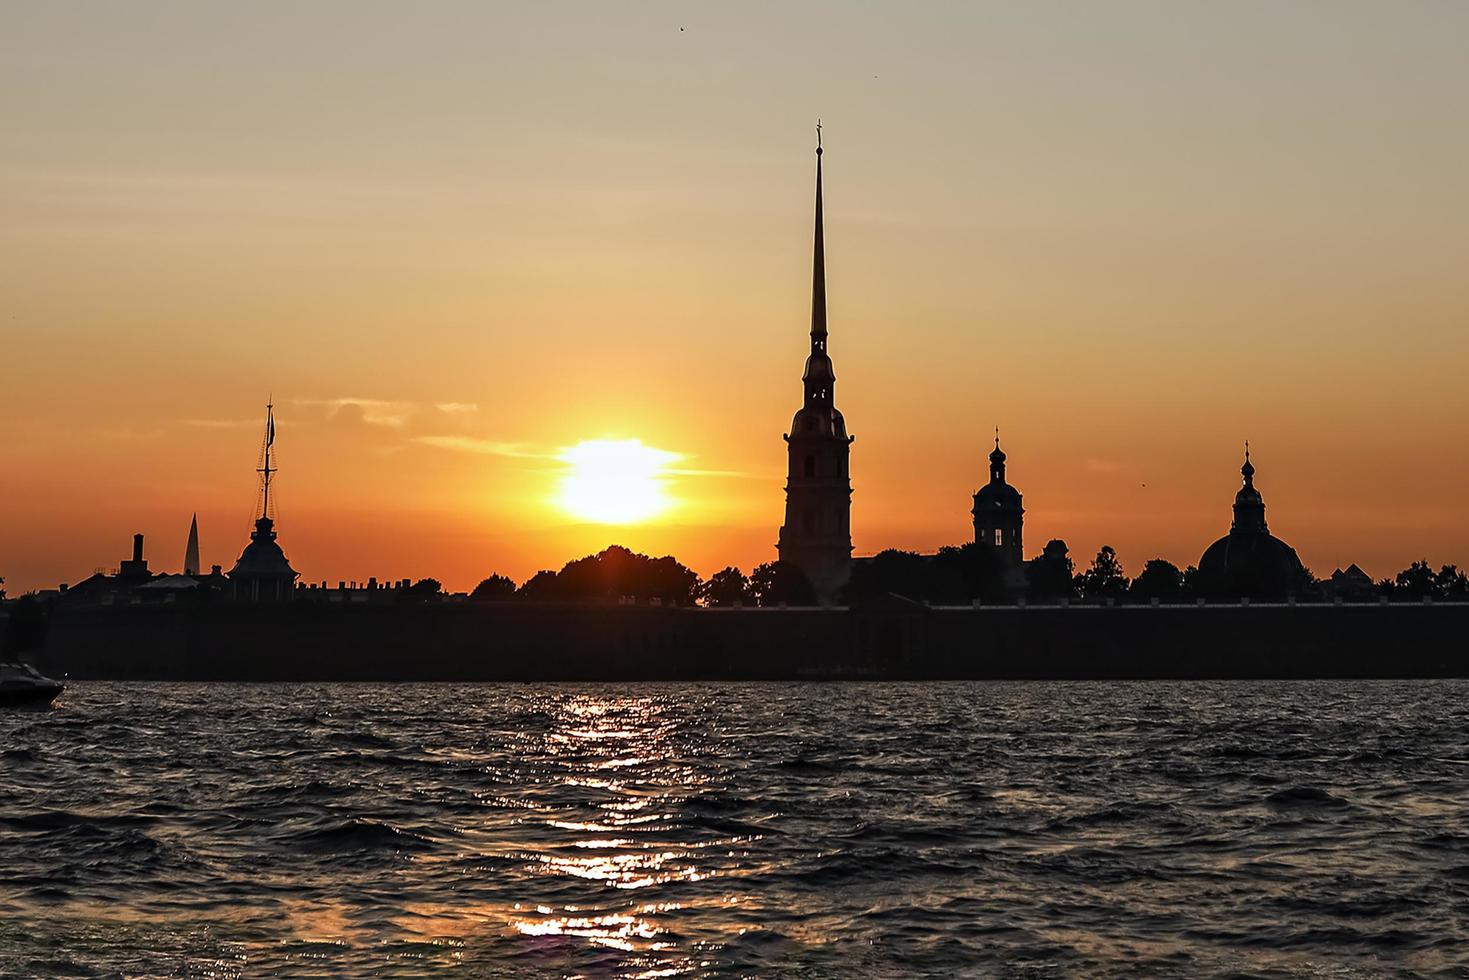 the silhouette of the Peter and Paul Fortress at sunset, view from the Neva River photo